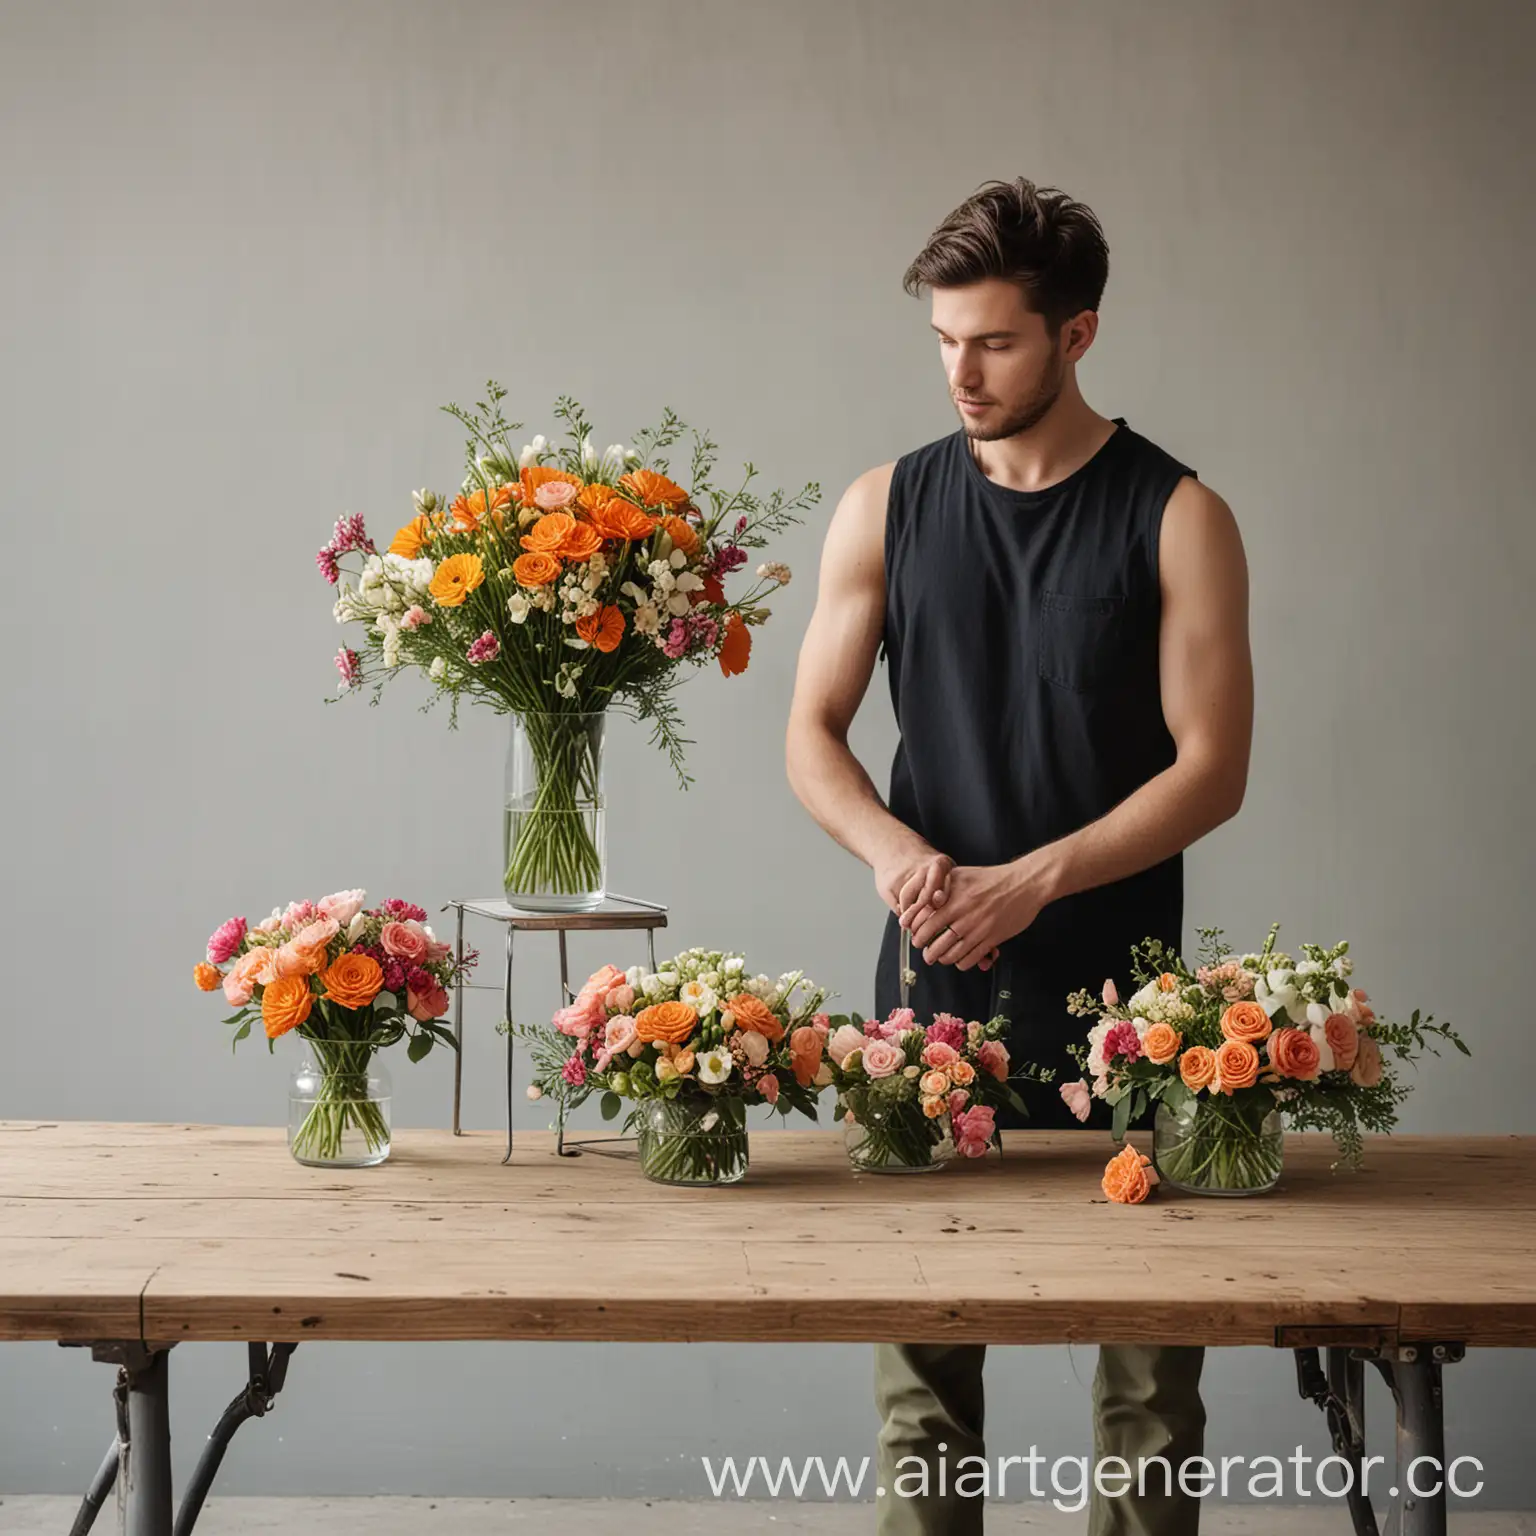 Florist-Creating-Bouquets-at-Floristic-Table-with-Floral-Tanks